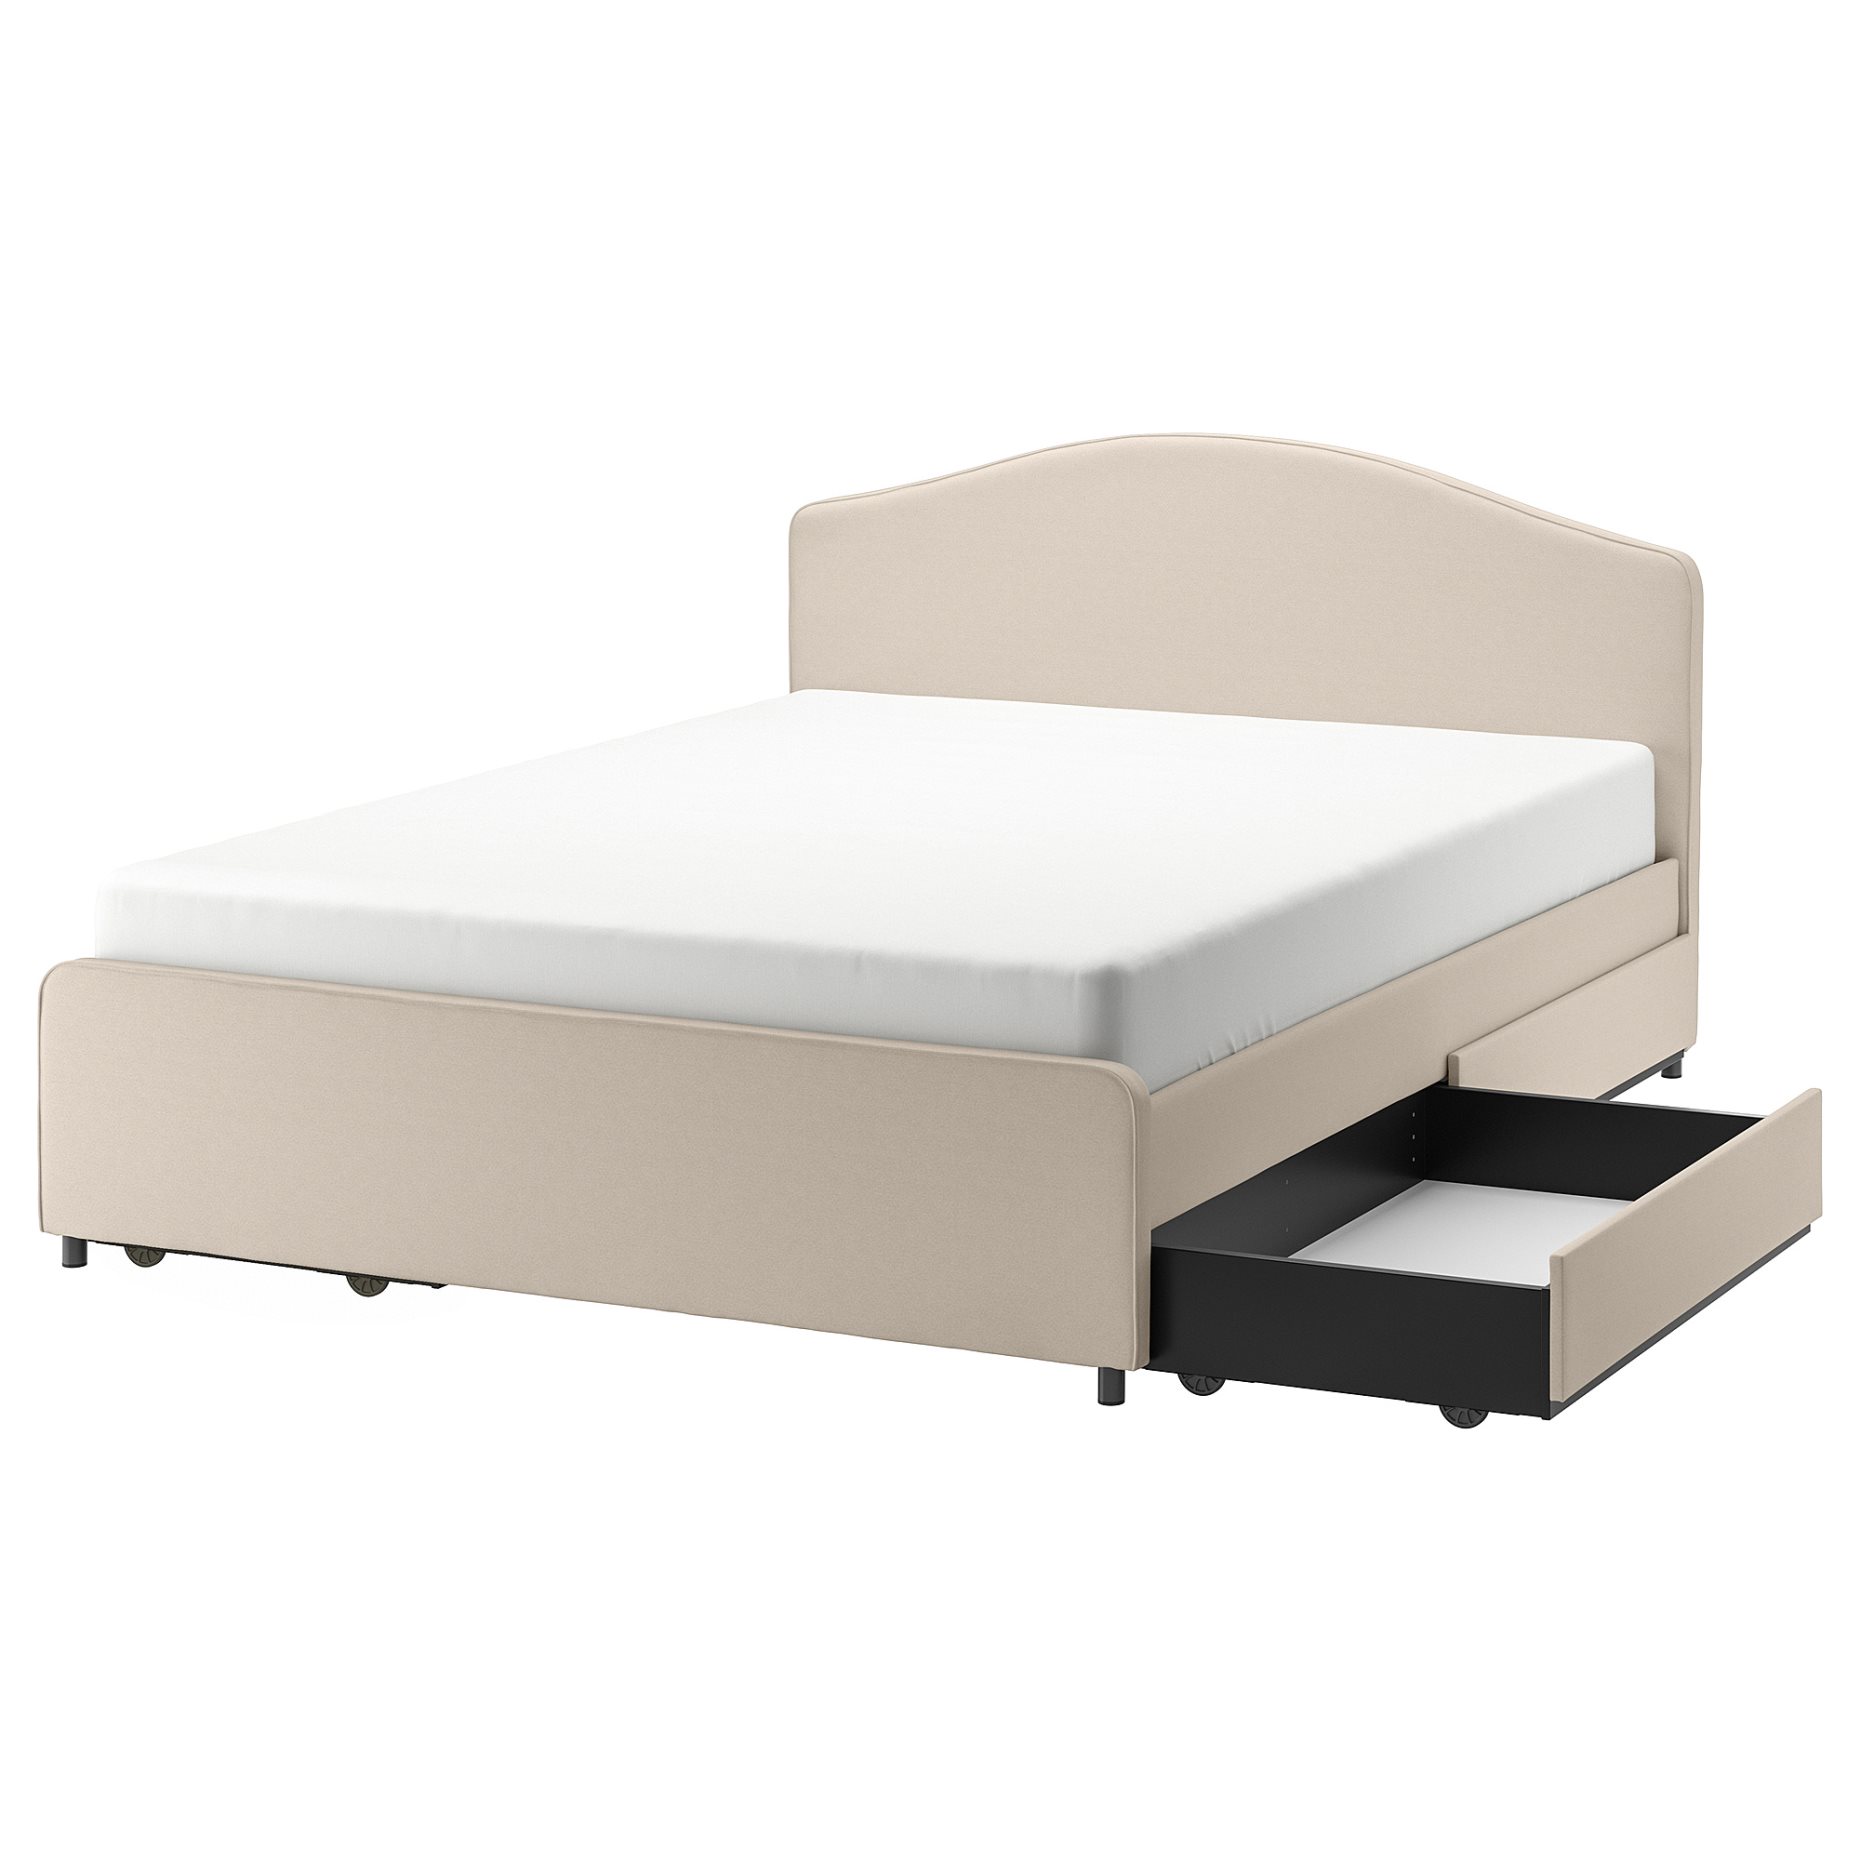 HAUGA, upholstered bed/4 storage boxes, 140X200 cm, 993.366.16